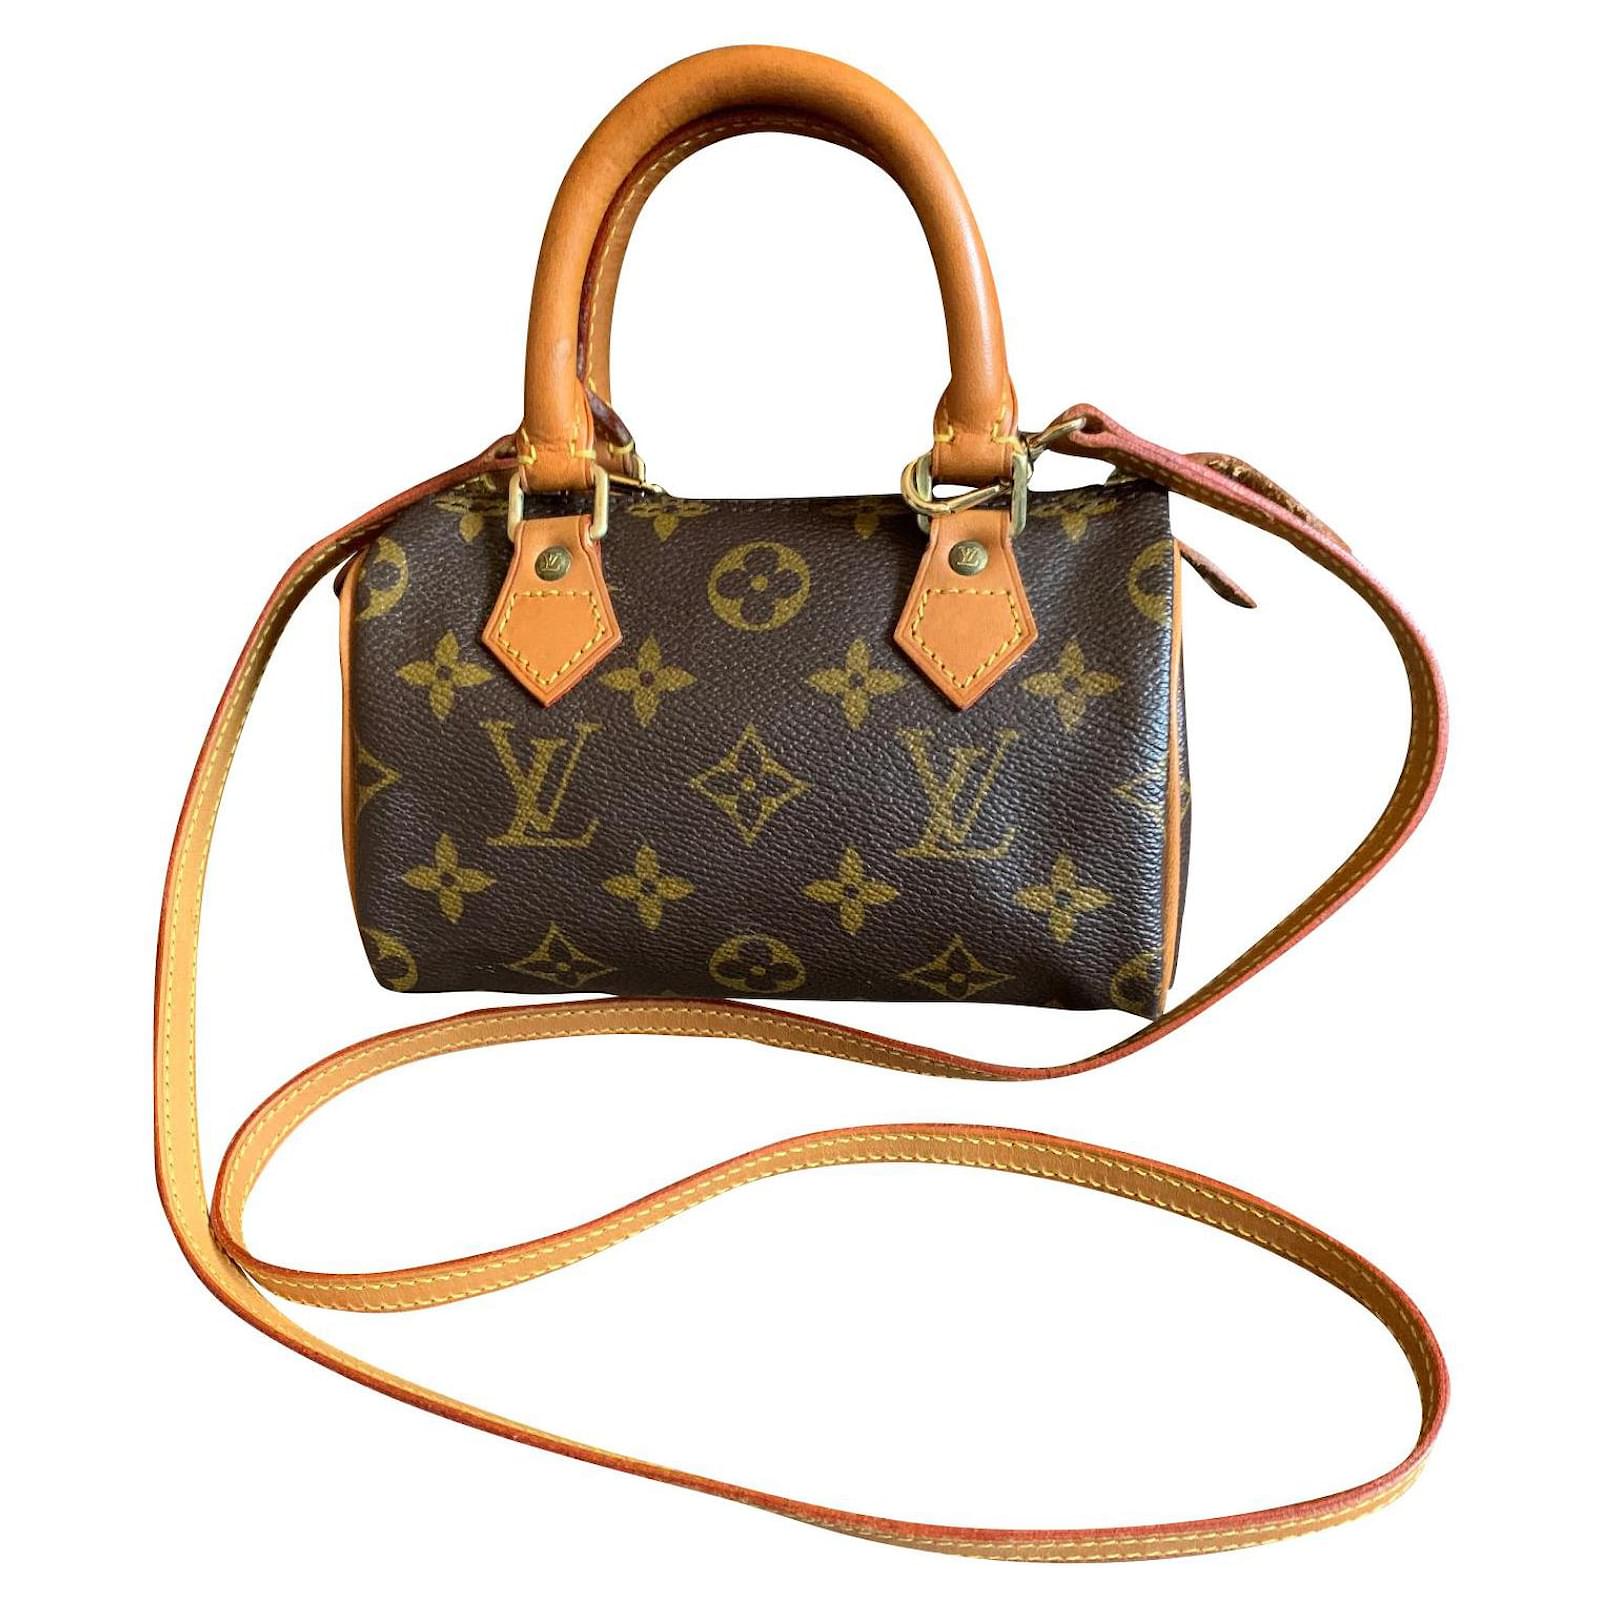 Joli Closet - We have several mini speedy bags available on our